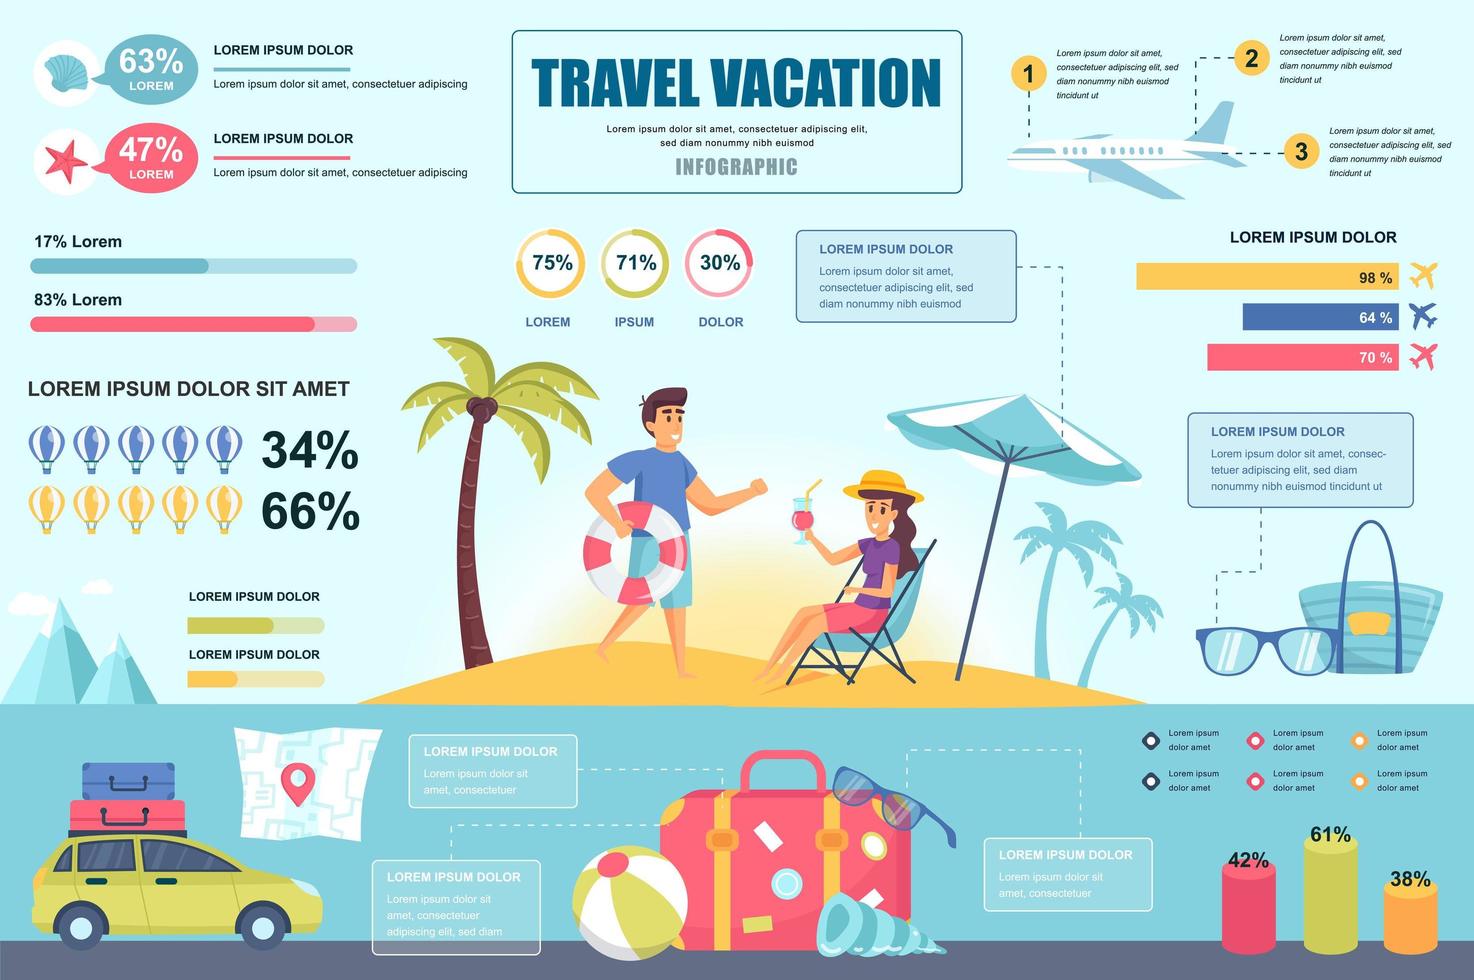 Travel vacation concept banner with infographic elements. Summer trip, flights and travel journey by car. Poster template with graphic data visualization, timeline, workflow. Vector illustration